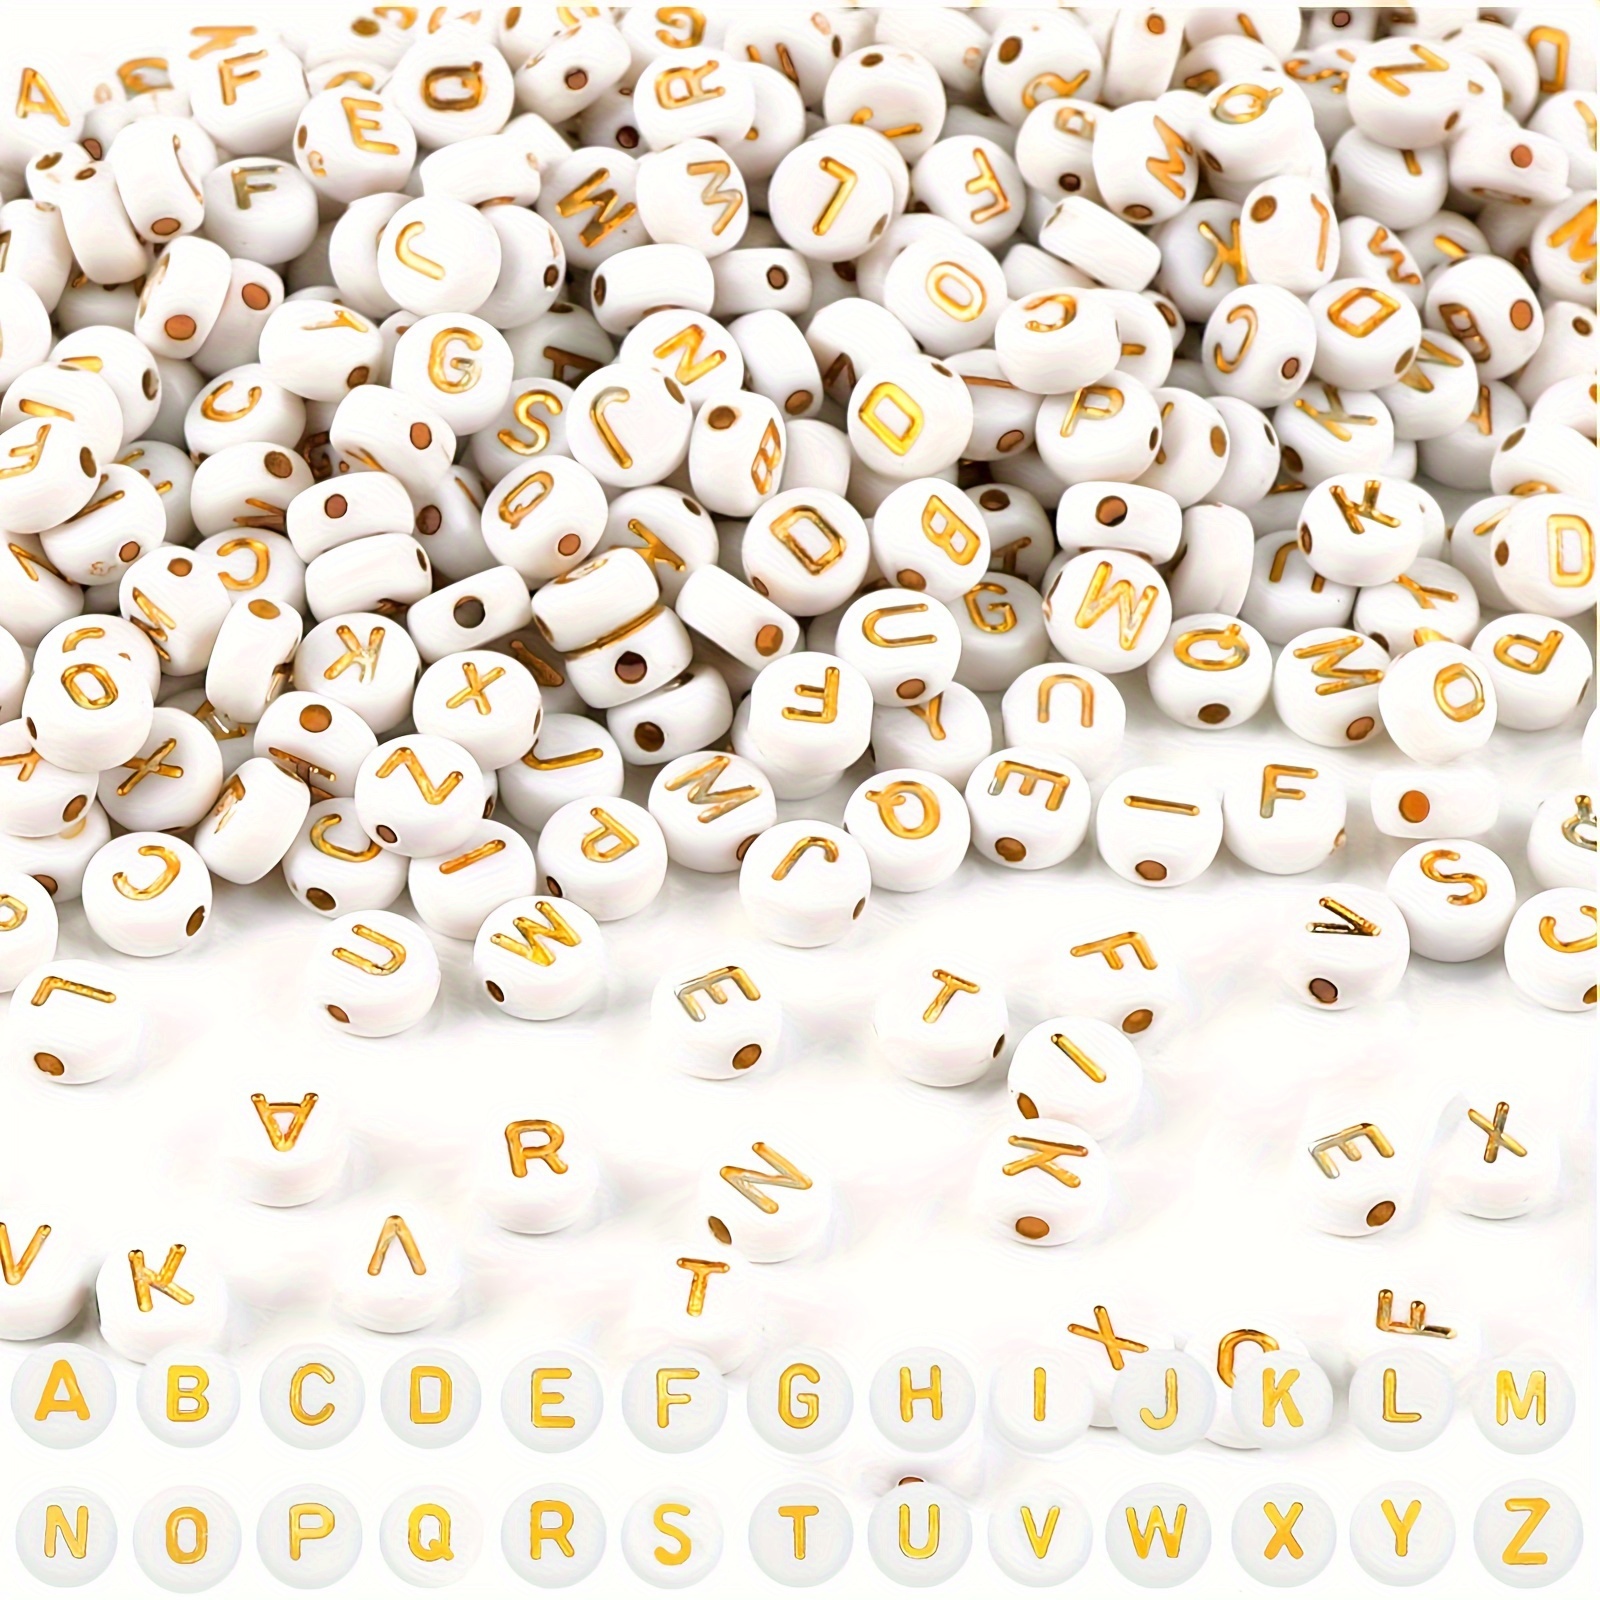  500Pcs White Round Letter Beads with Letter A 7x4mm Vowel  Letter Beads Acrylic Alphabet Loose Beads Spacers for DIY Bracelet Necklace  Jewelry Making : Arts, Crafts & Sewing